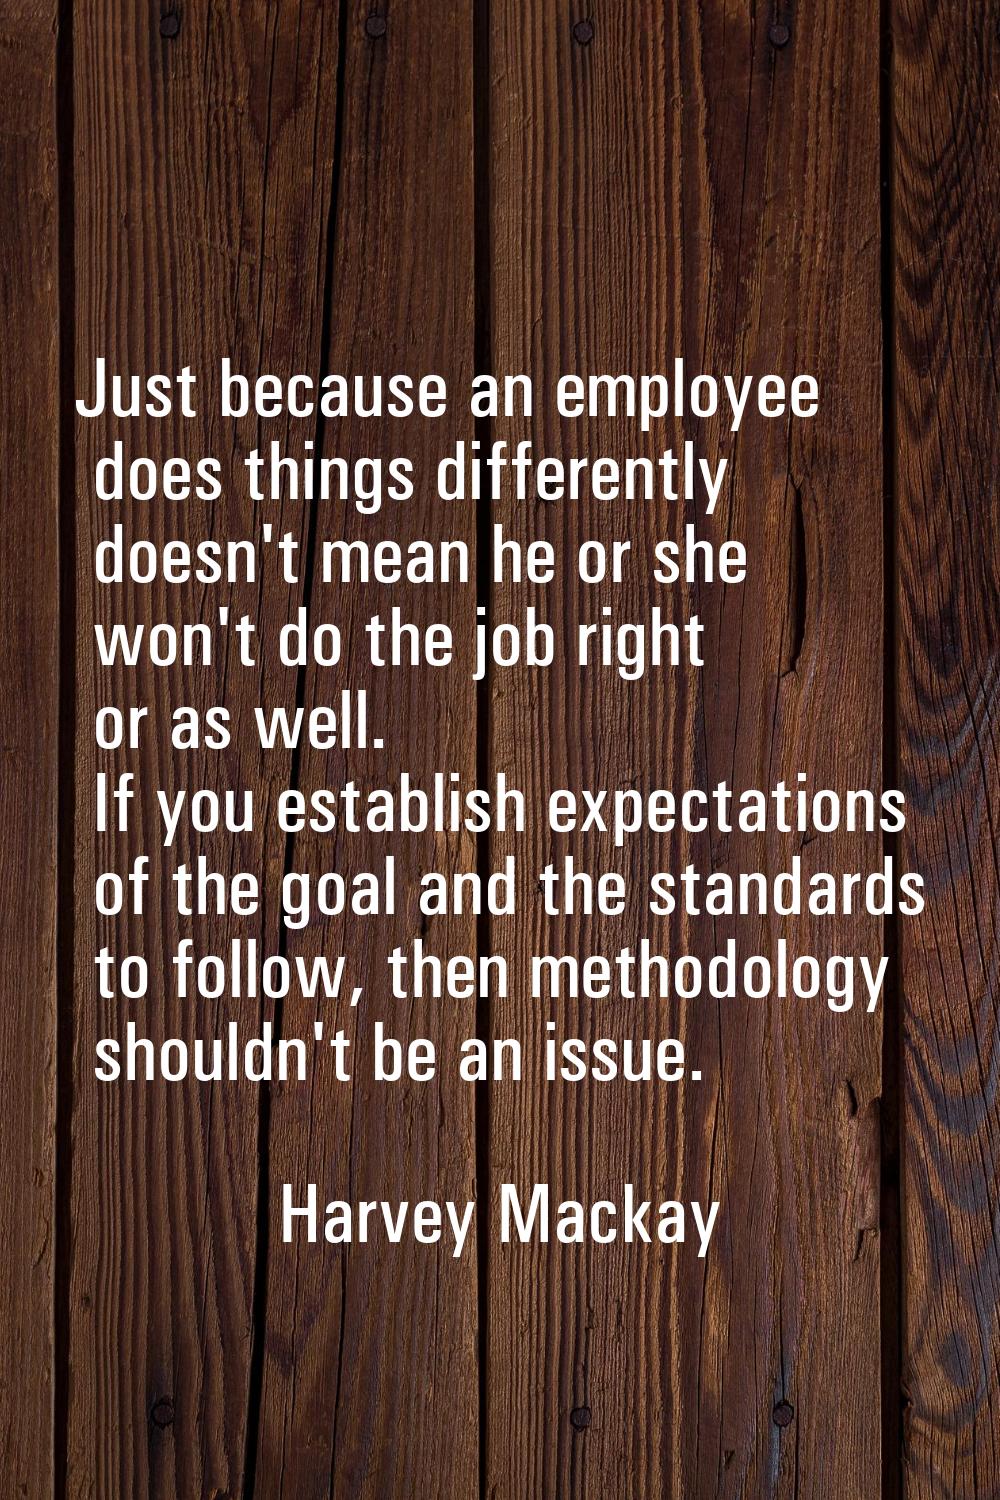 Just because an employee does things differently doesn't mean he or she won't do the job right or a